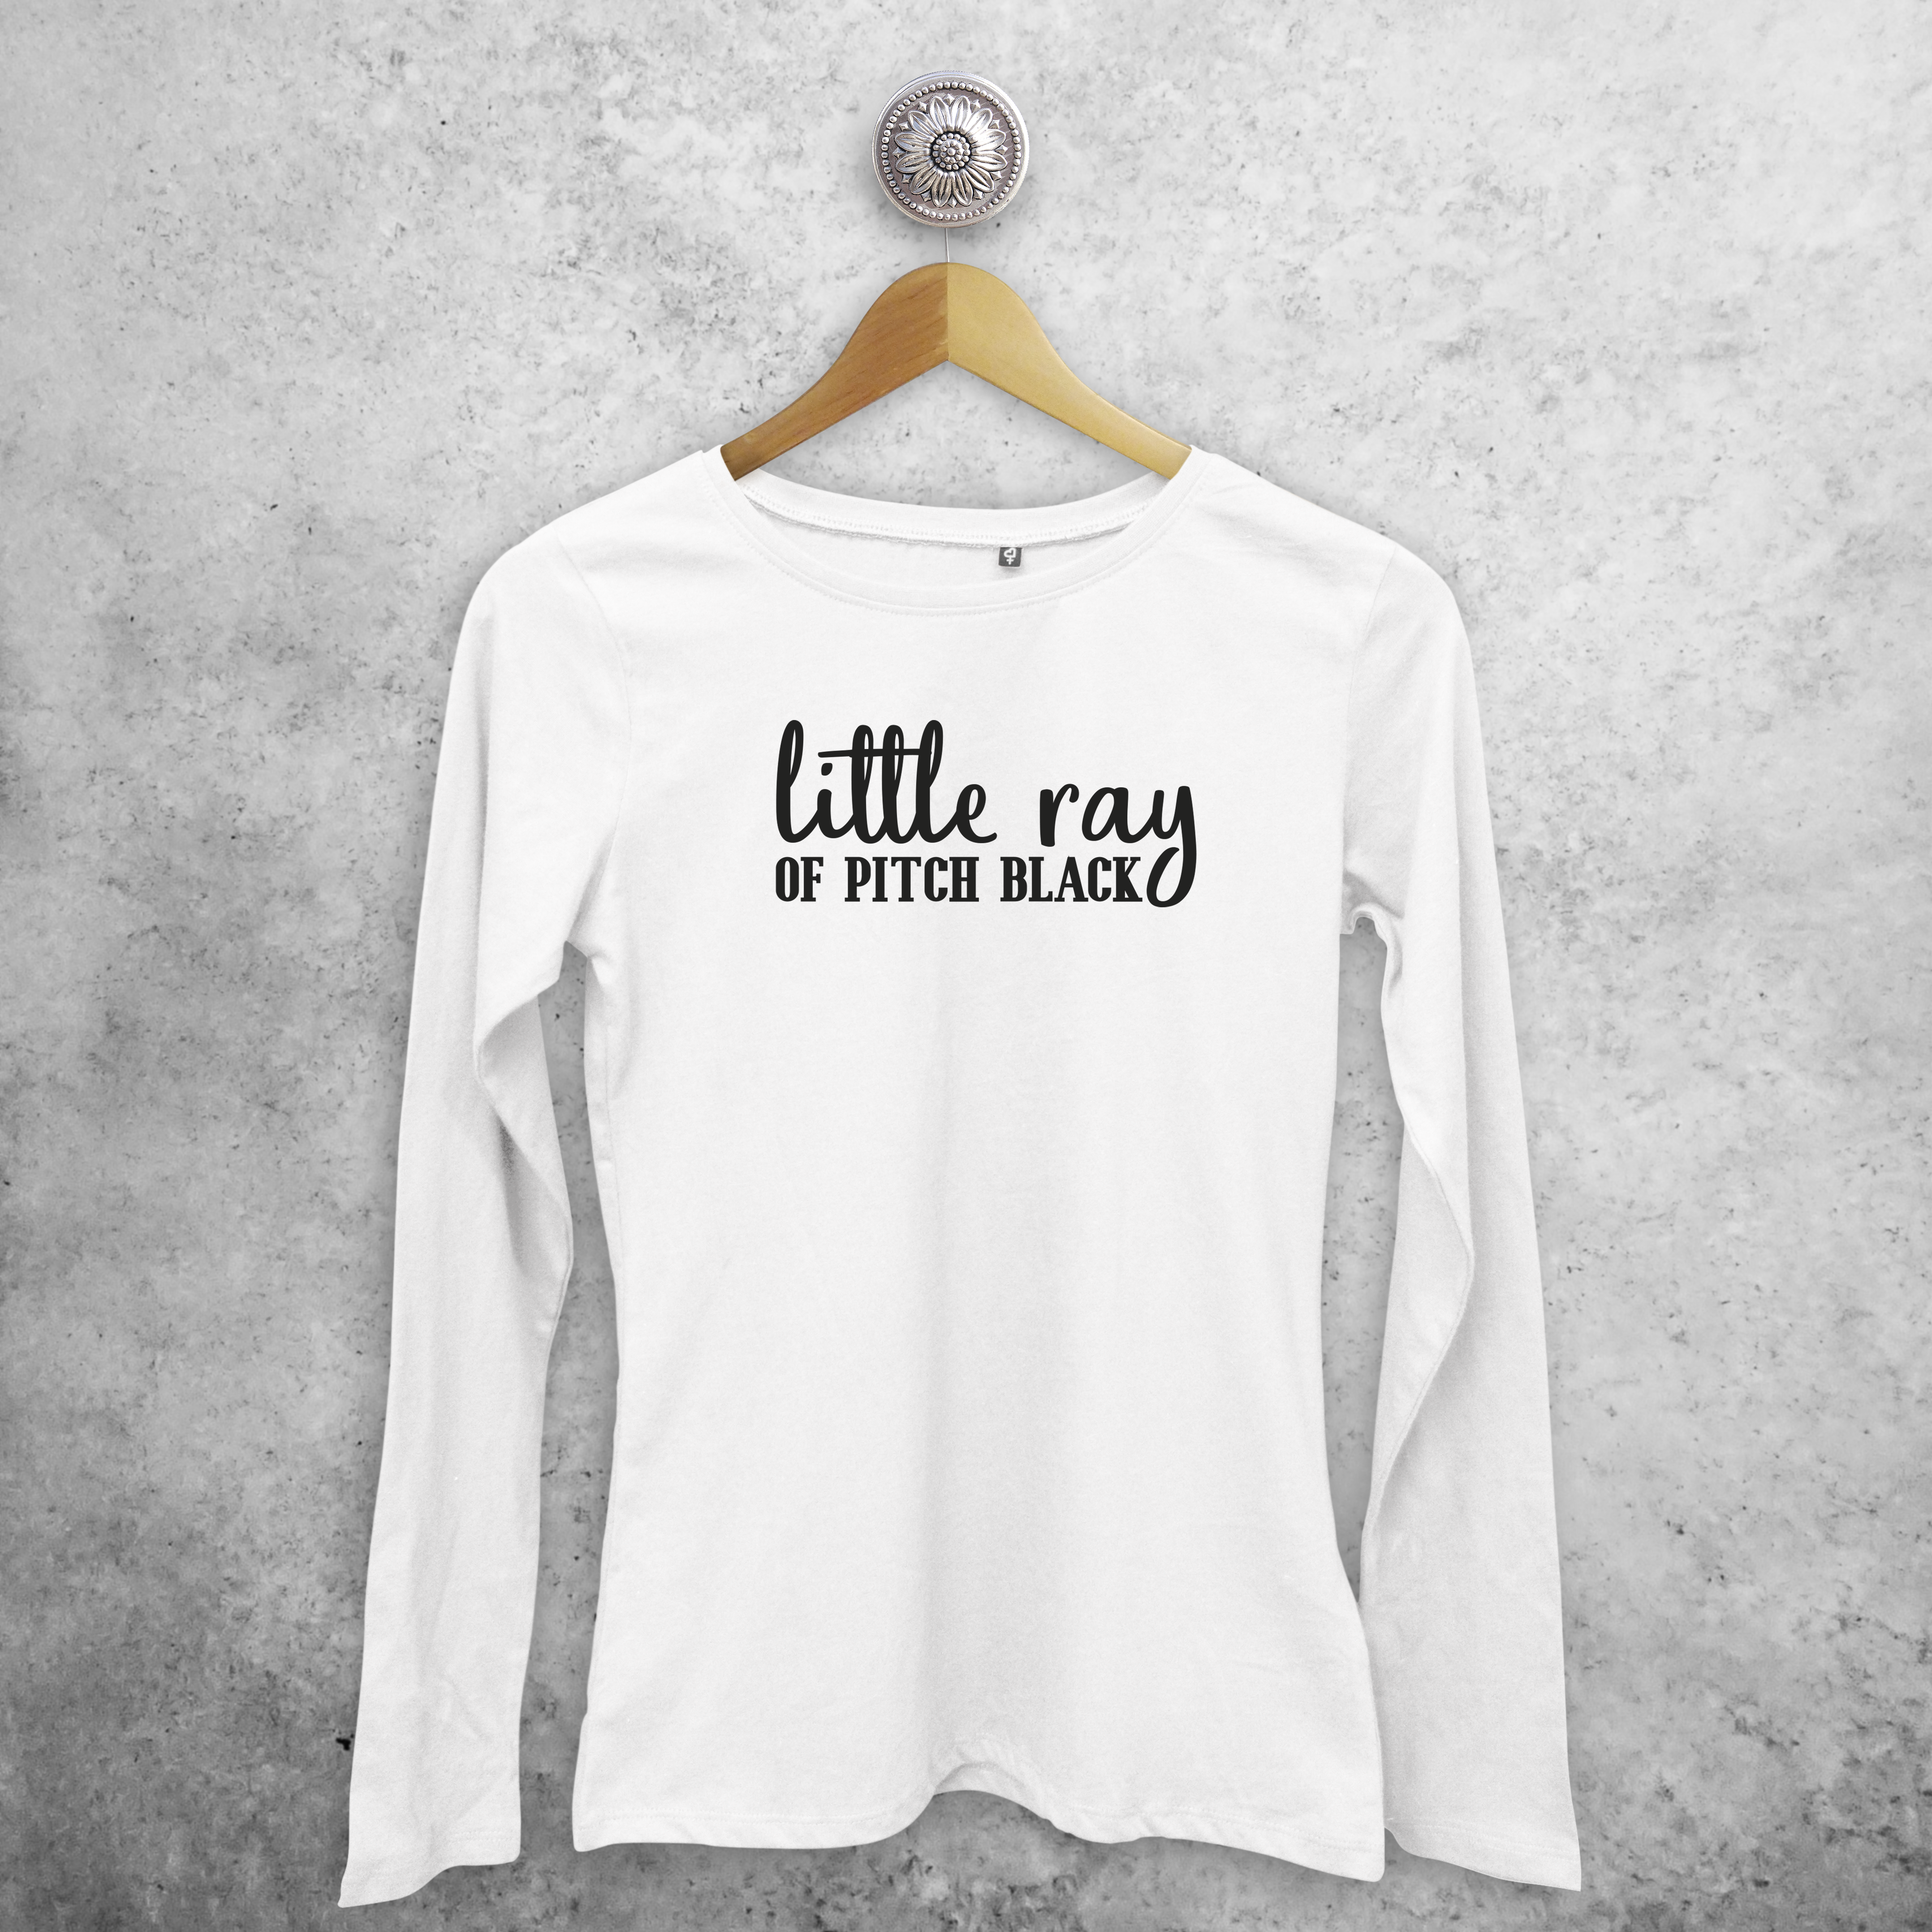 'Little ray of pitch black' adult longsleeve shirt